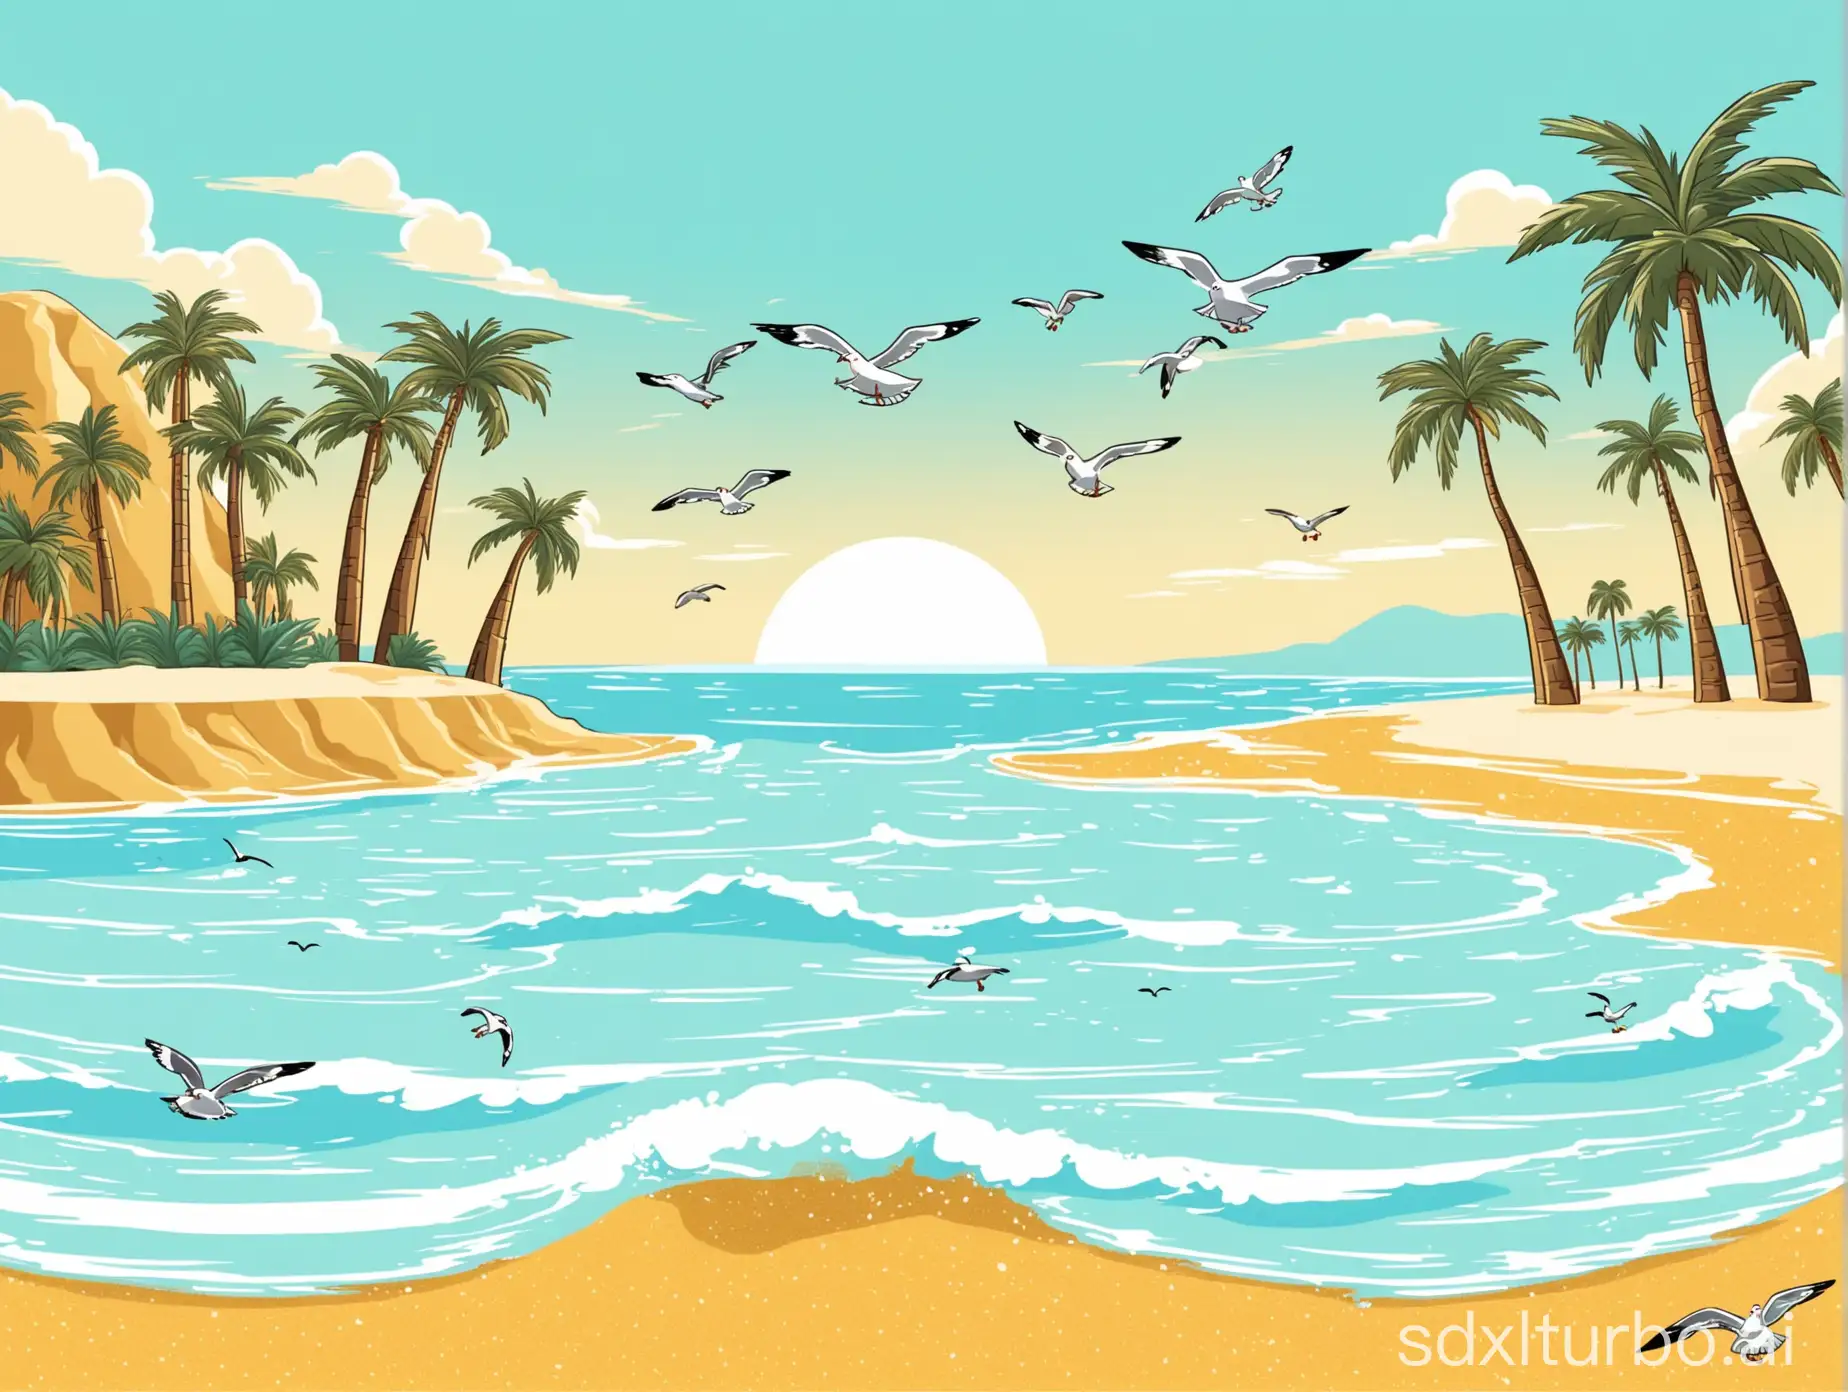 Tranquil-Seaside-Scene-with-Palm-Trees-and-Seagulls